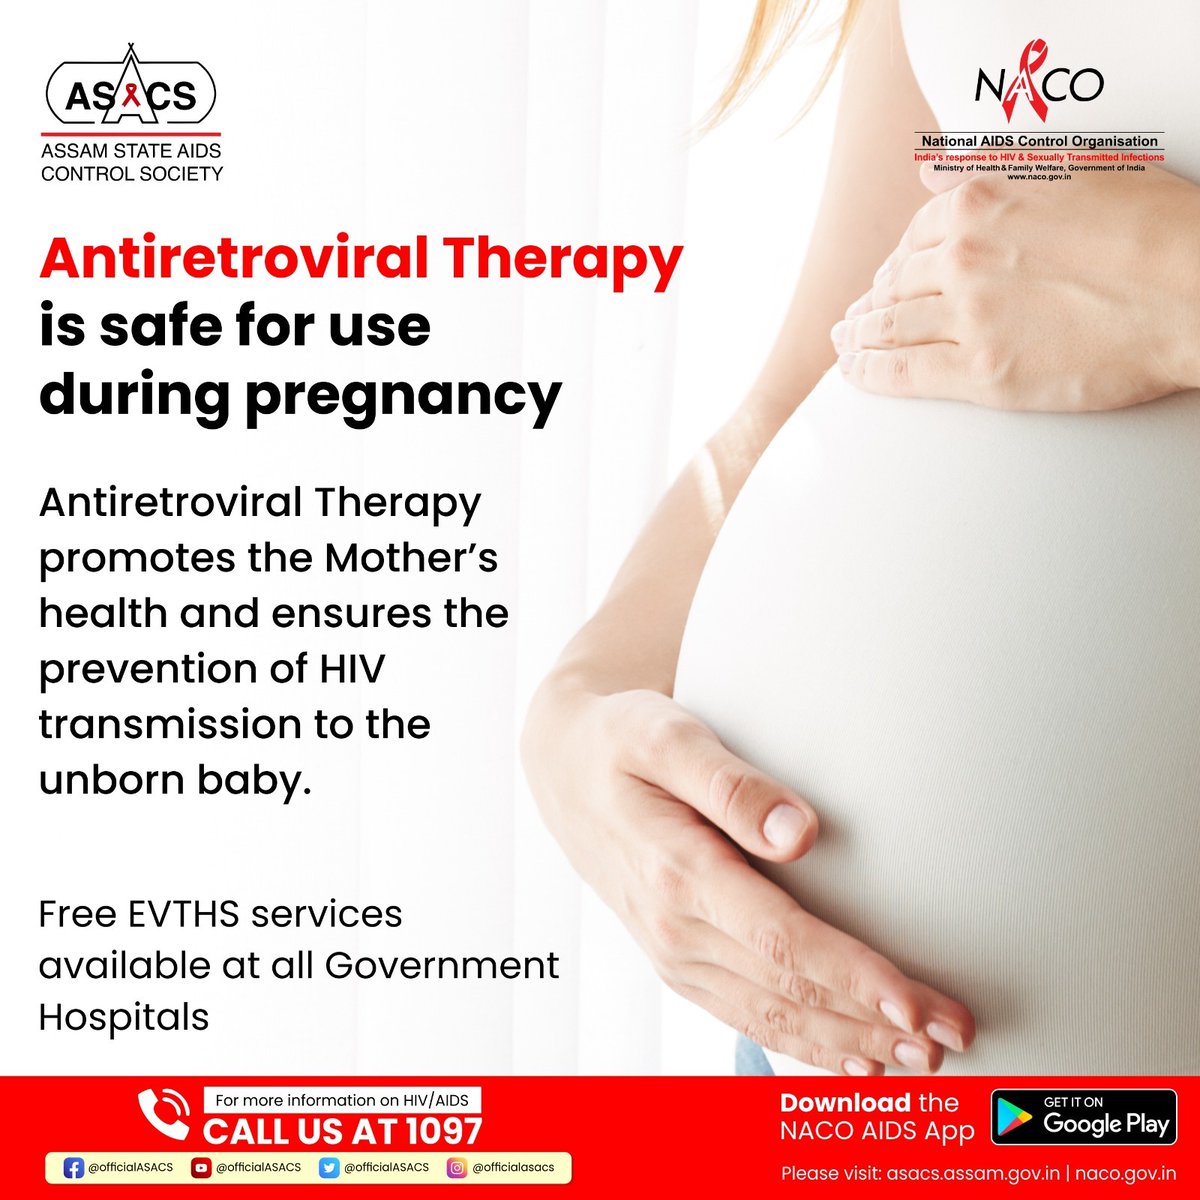 Antiretroviral therapy (ART) use during pregnancy is generally considered safe and highly recommended for pregnant women living with HIV.

#ASACS #ART #antiretroviraltherapy #AIDS #MothersHealth #Pregnant #Assam #healthcare